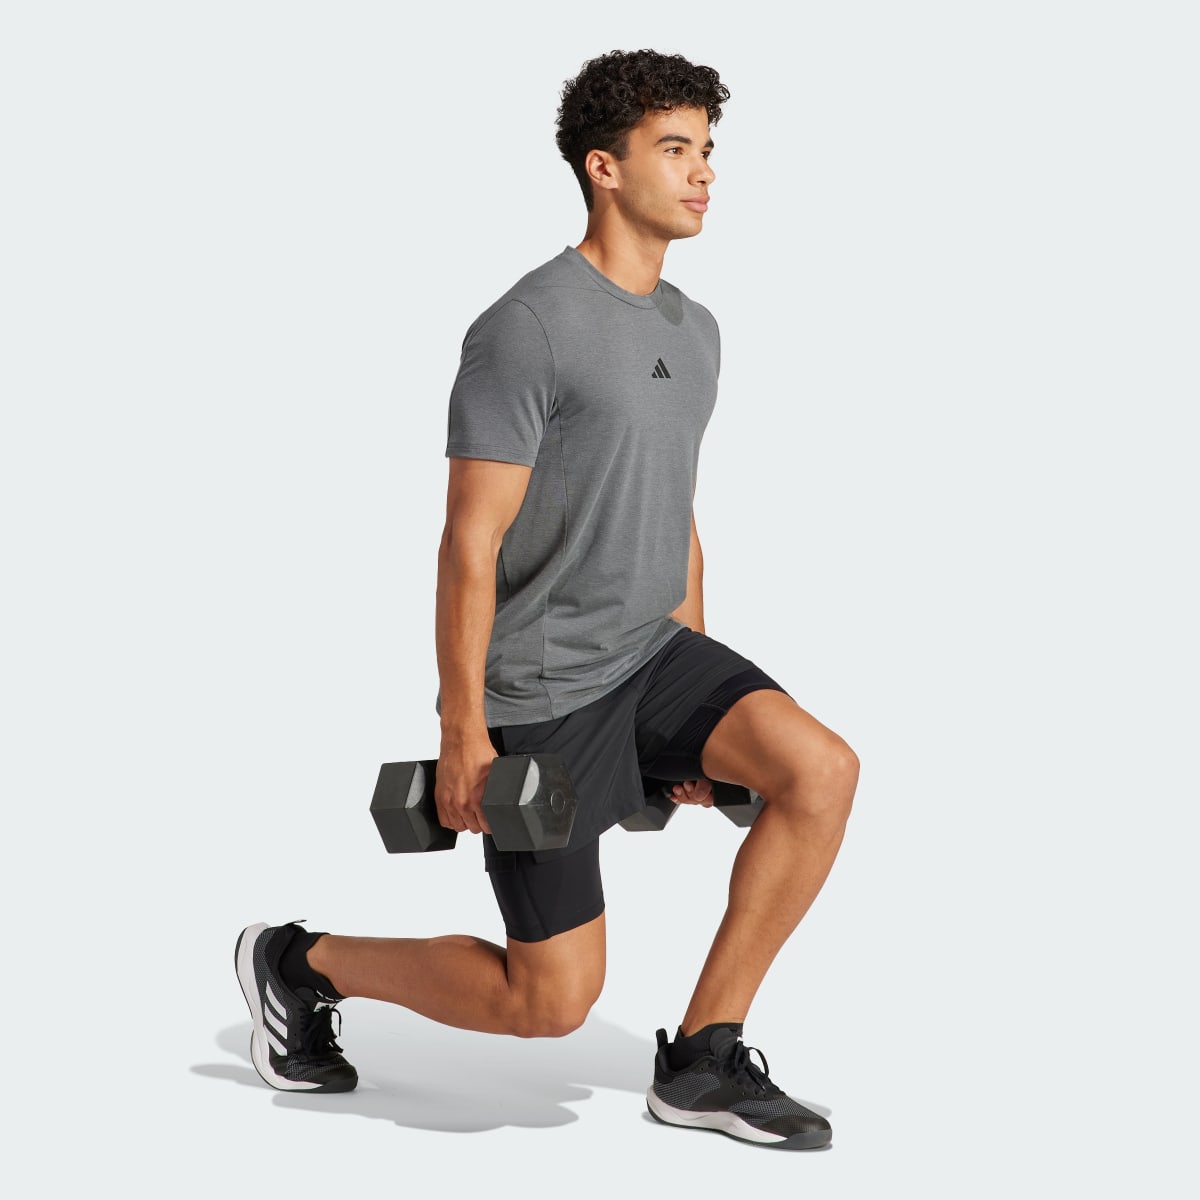 Adidas Designed for Training Workout Tee. 5